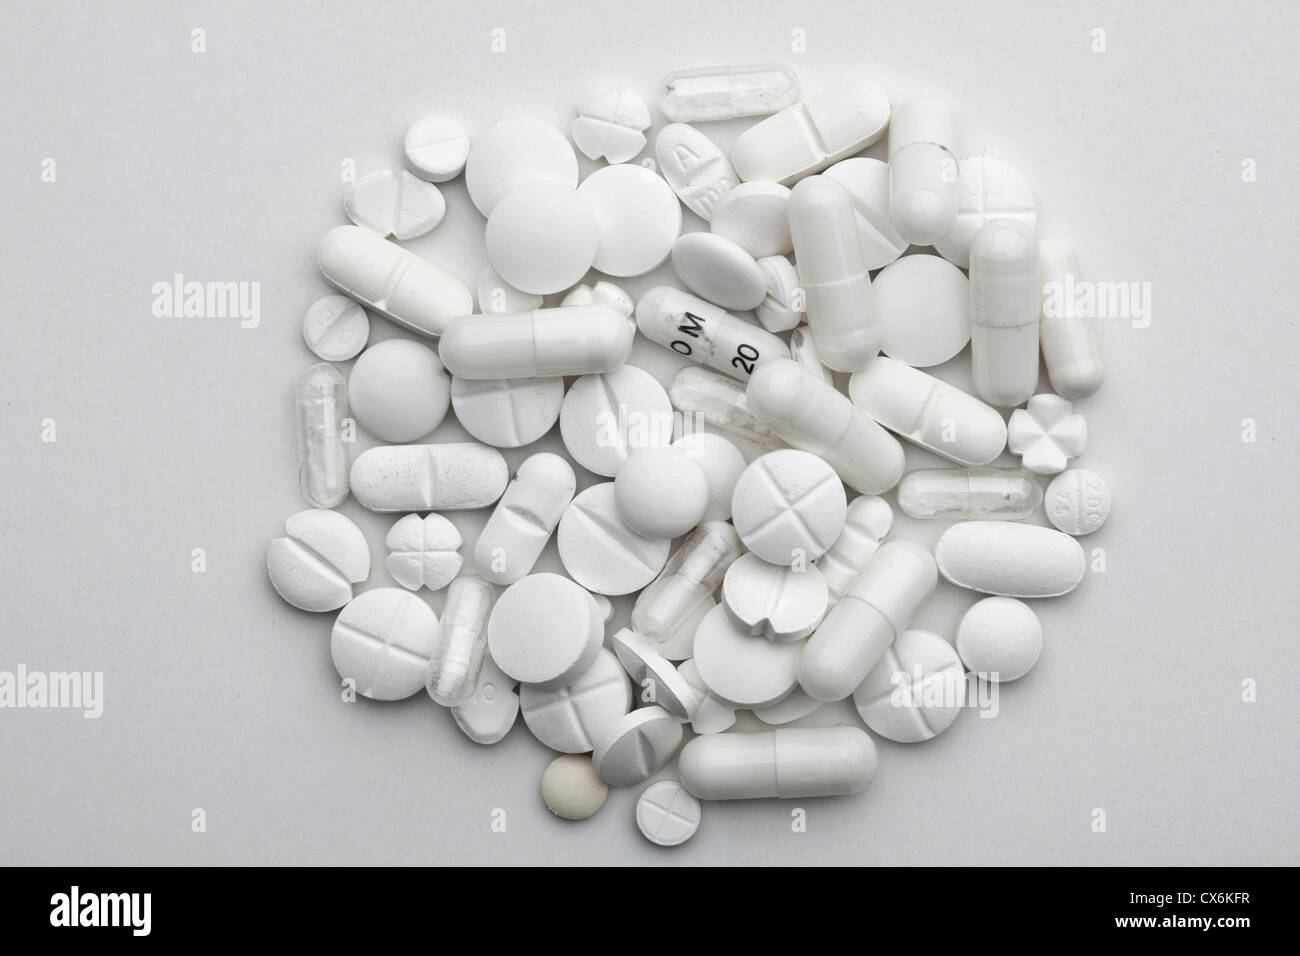 A heap of various white pills and capsules Stock Photo